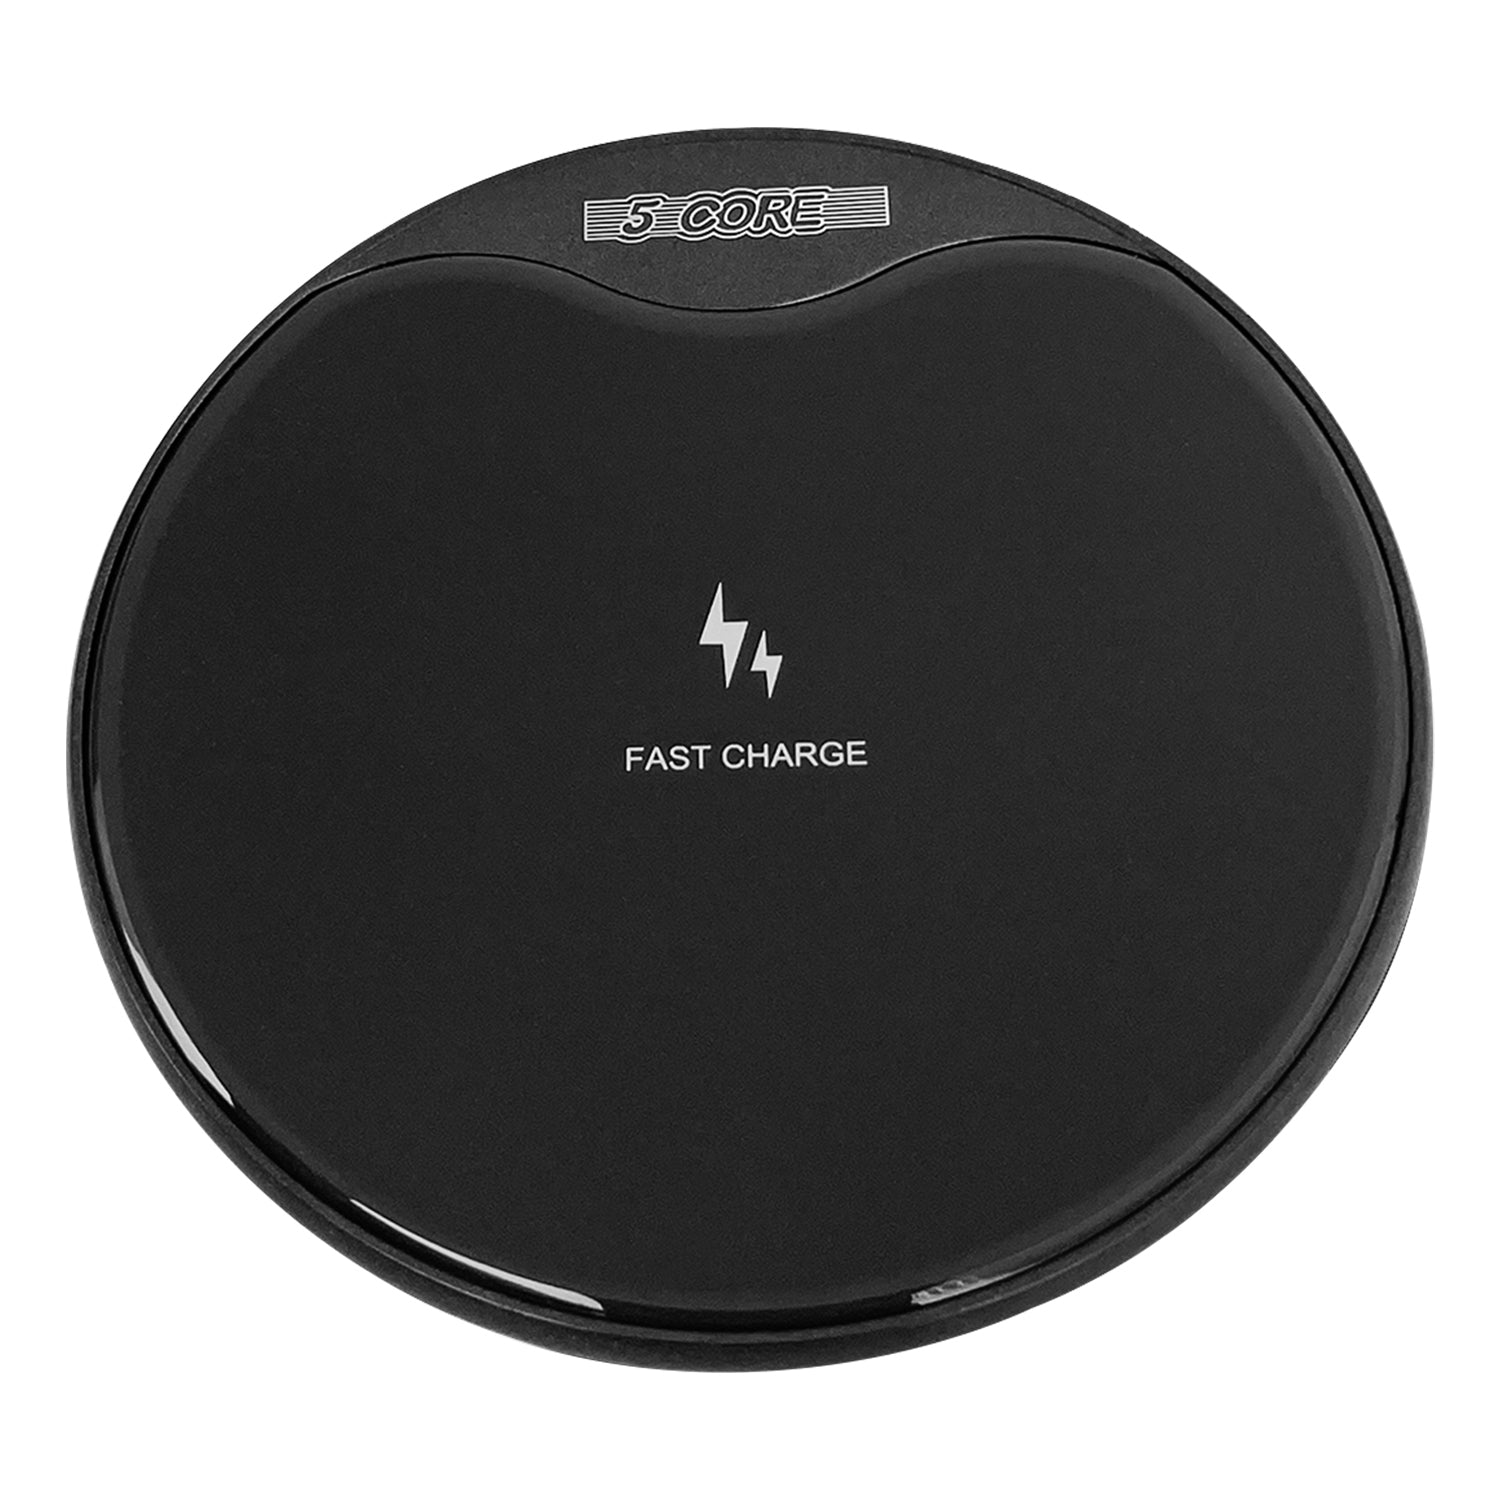 5Core Wireless Charging Pad 15W Qi-Certified Fast Phone Charging Mat Cargador Inalámbrico Para